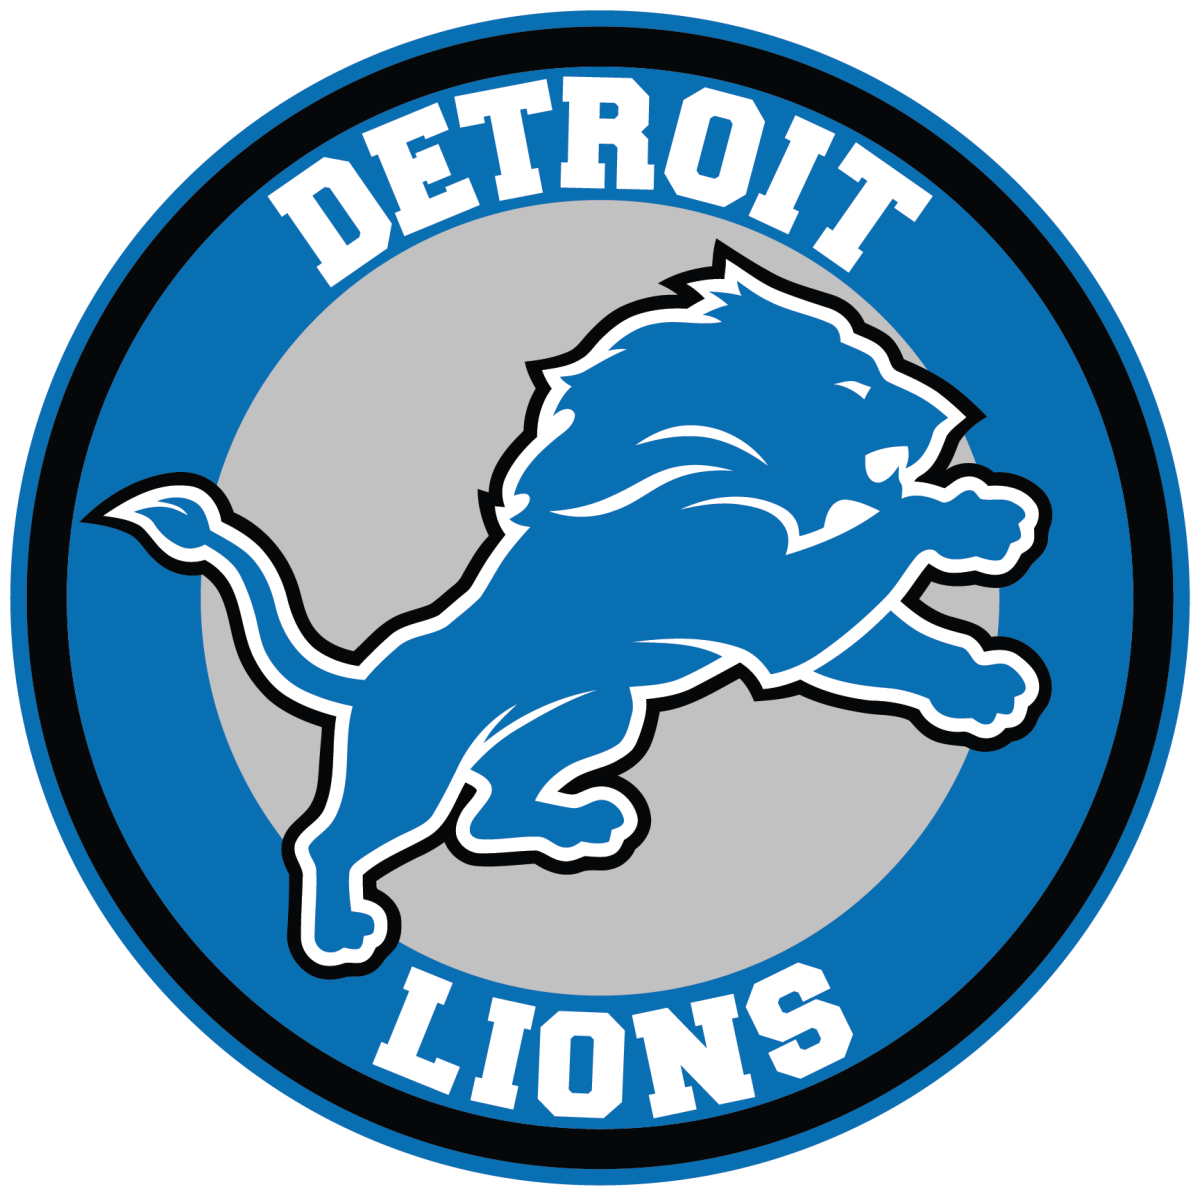 In 1952, the Detroit Lions were the NFL champions.